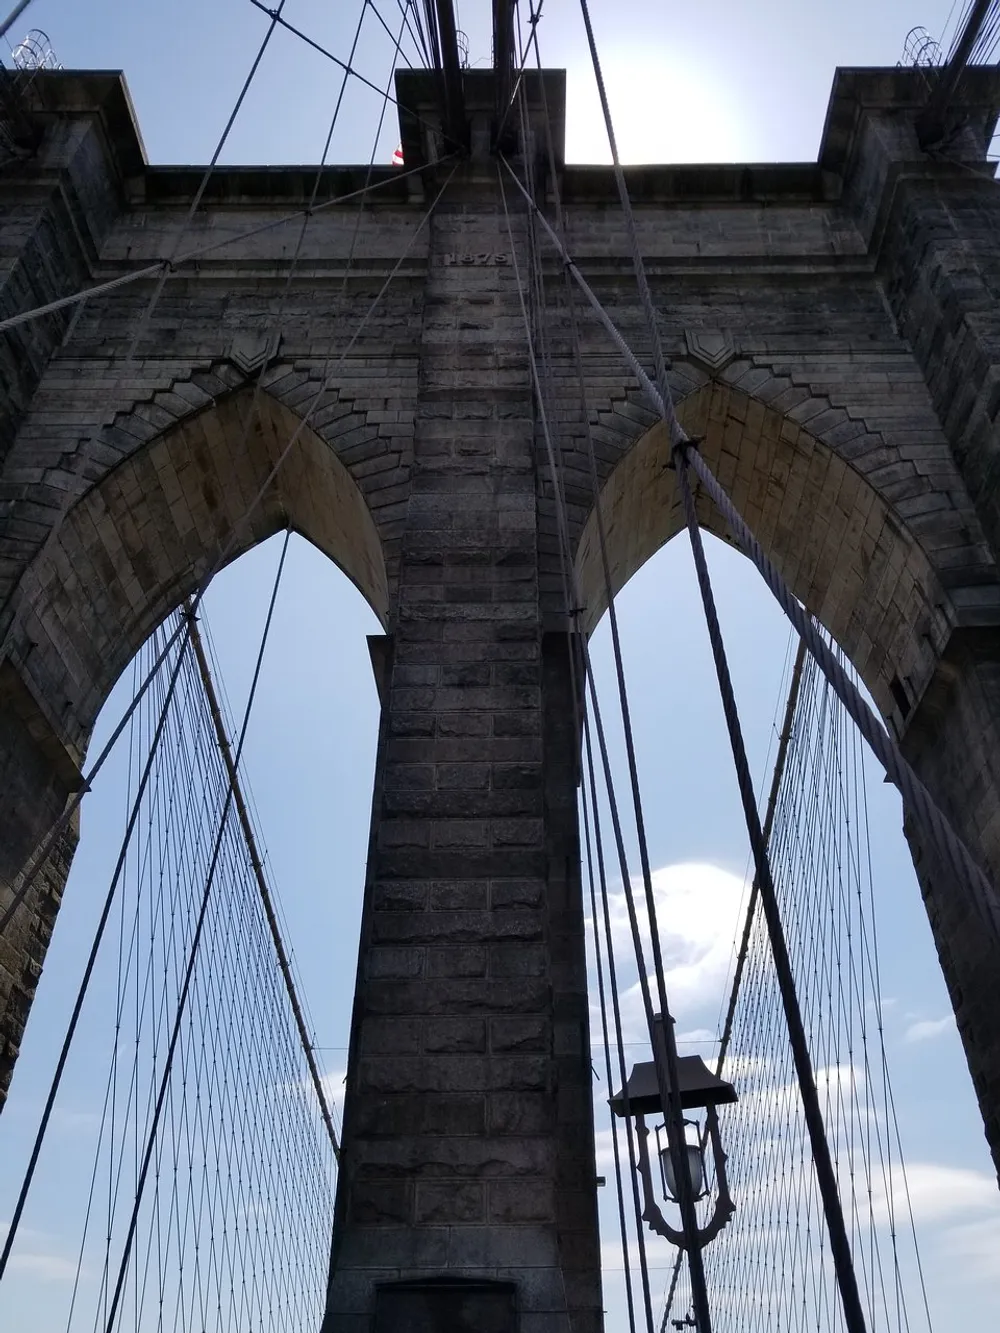 The image shows an upward view of a towering stone bridge pillar with numerous suspension cables possibly part of an iconic suspension bridge